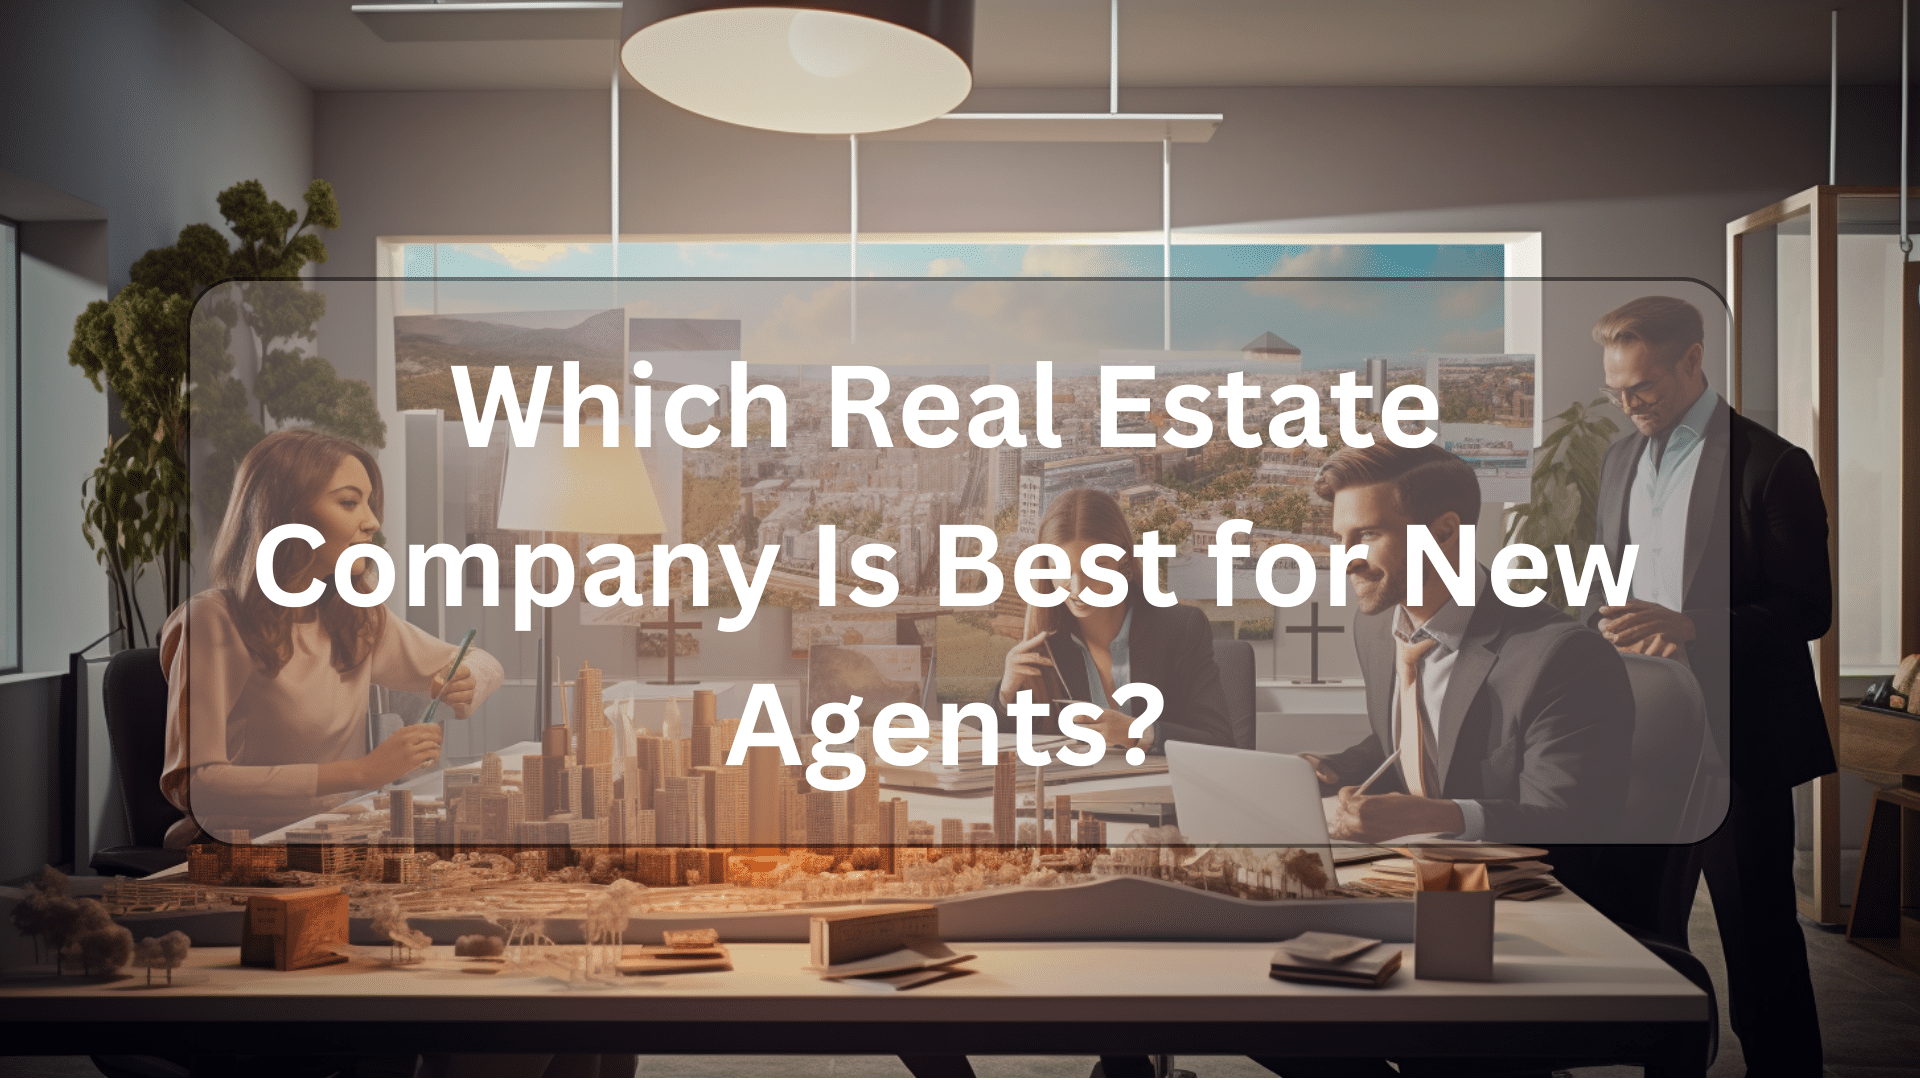 Which real estate company is best for new agents illustration